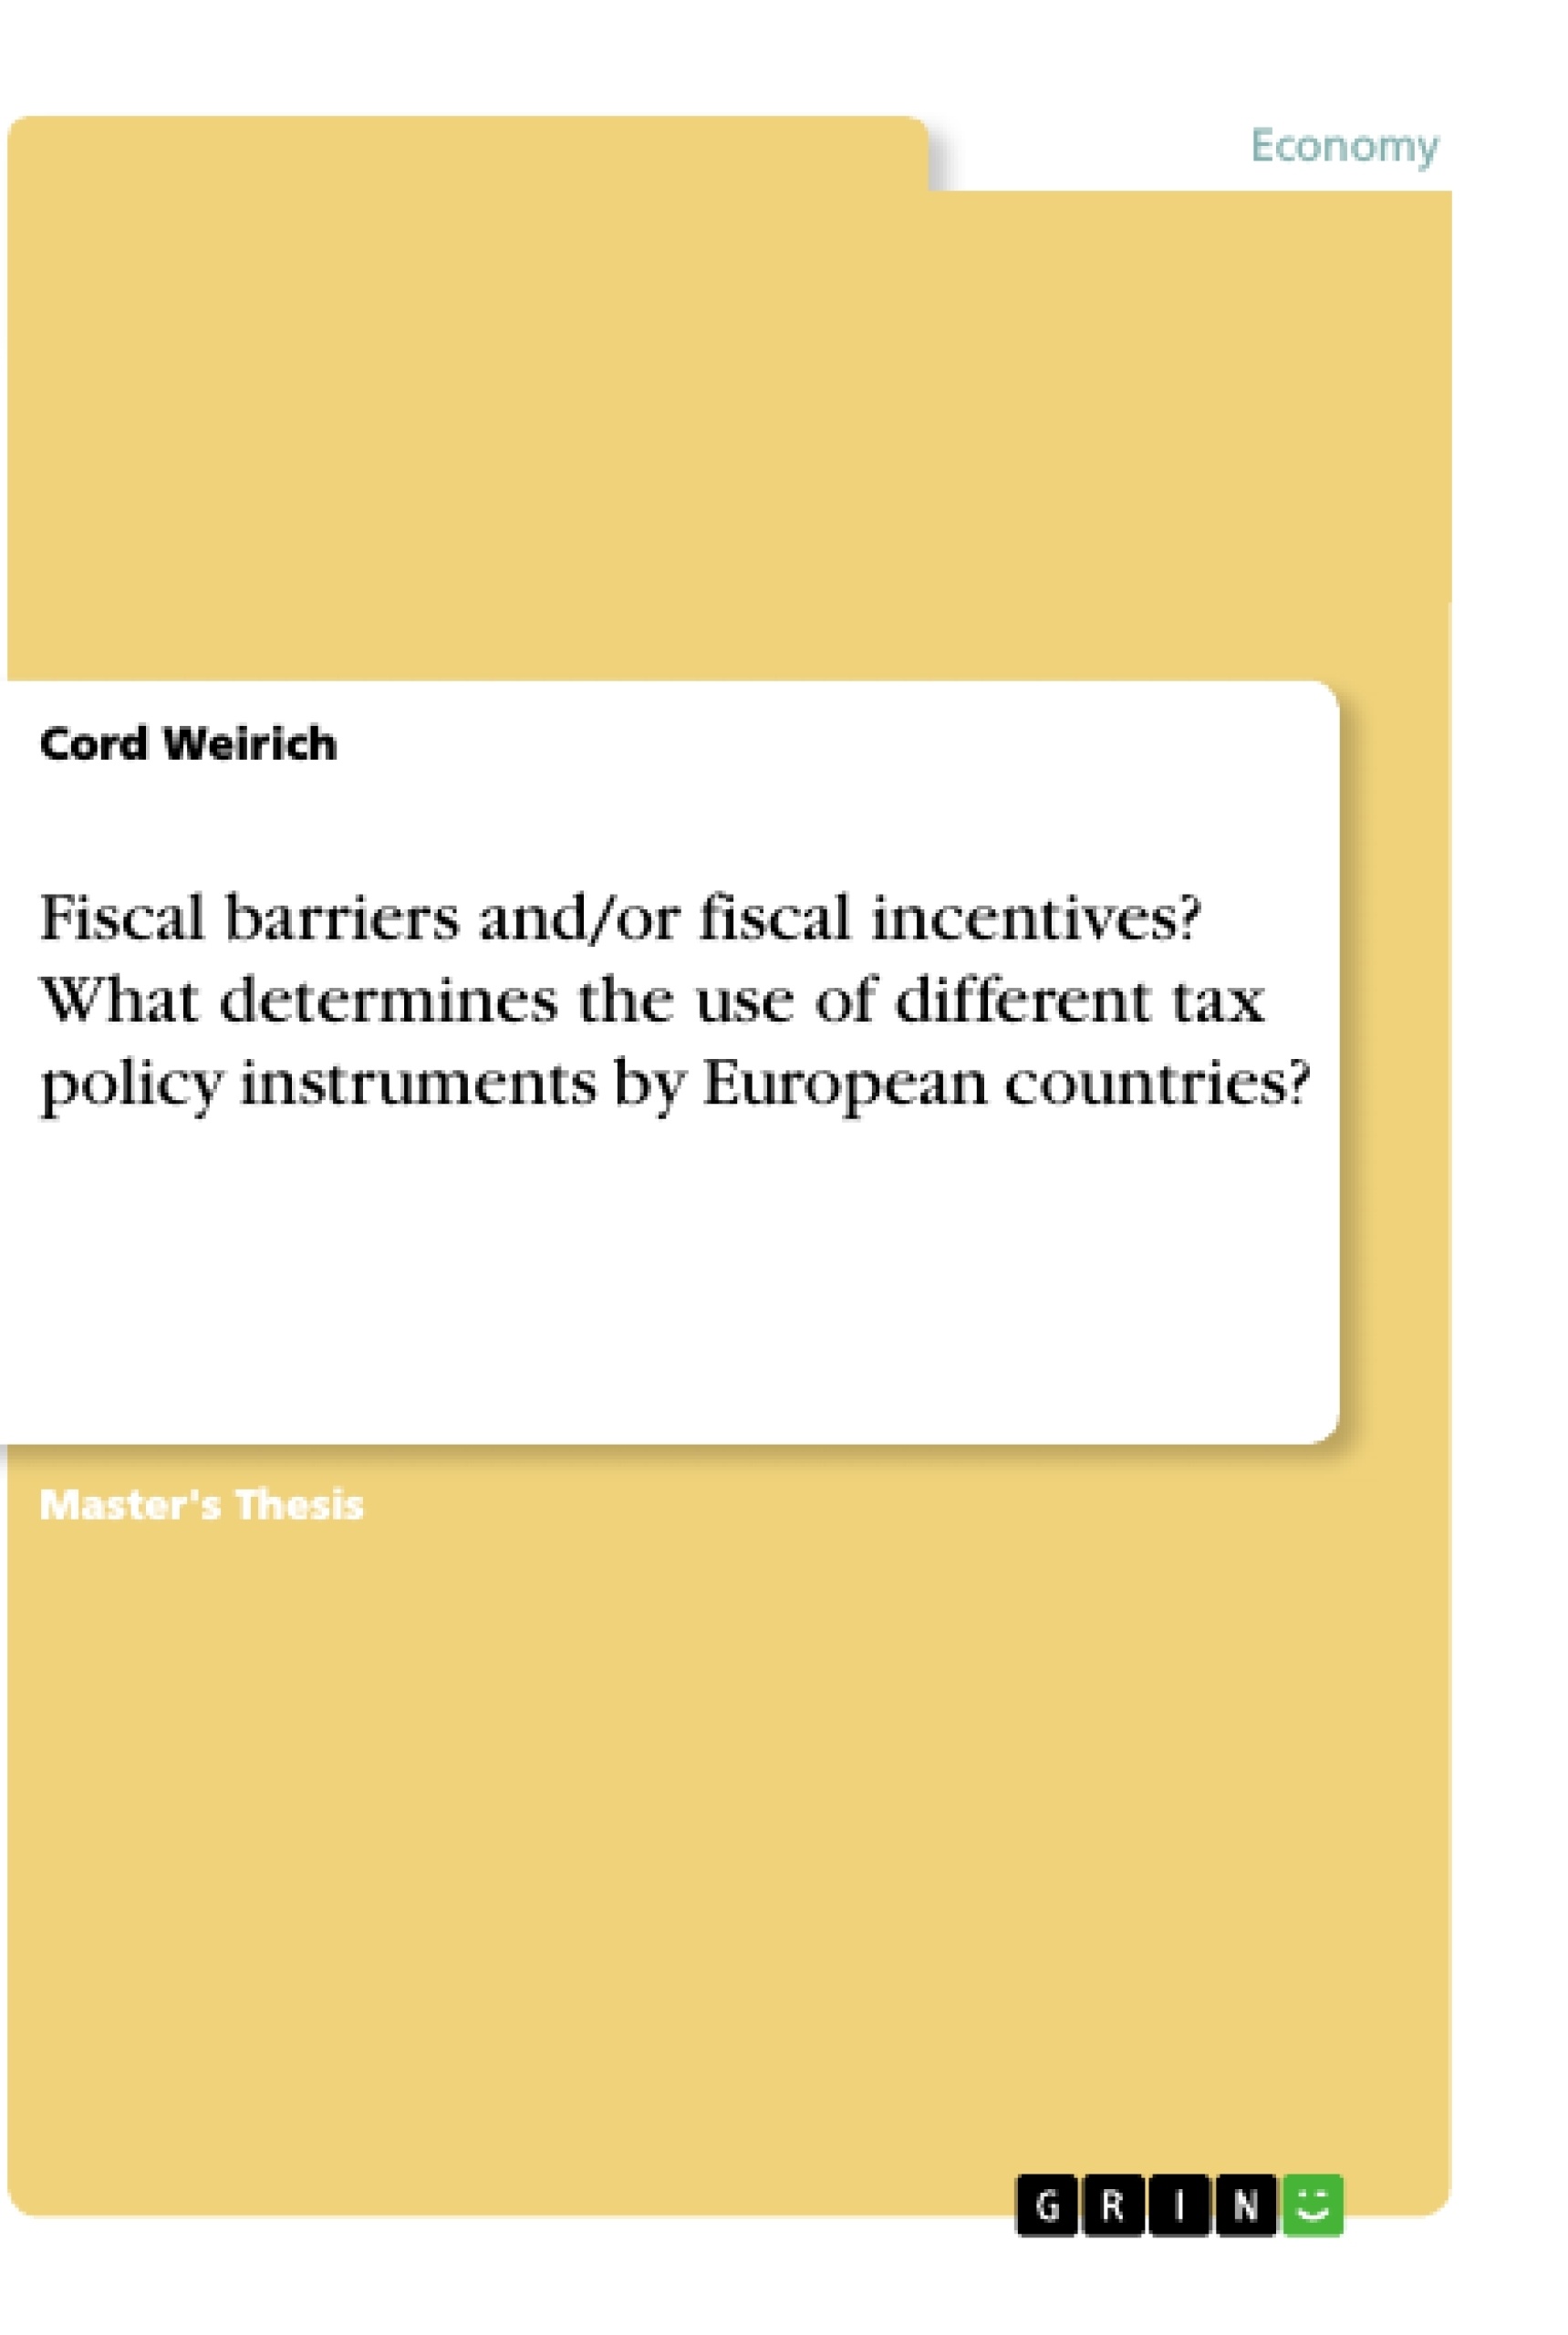 Título: Fiscal barriers and/or fiscal incentives? What determines the use of different tax policy instruments by European countries?